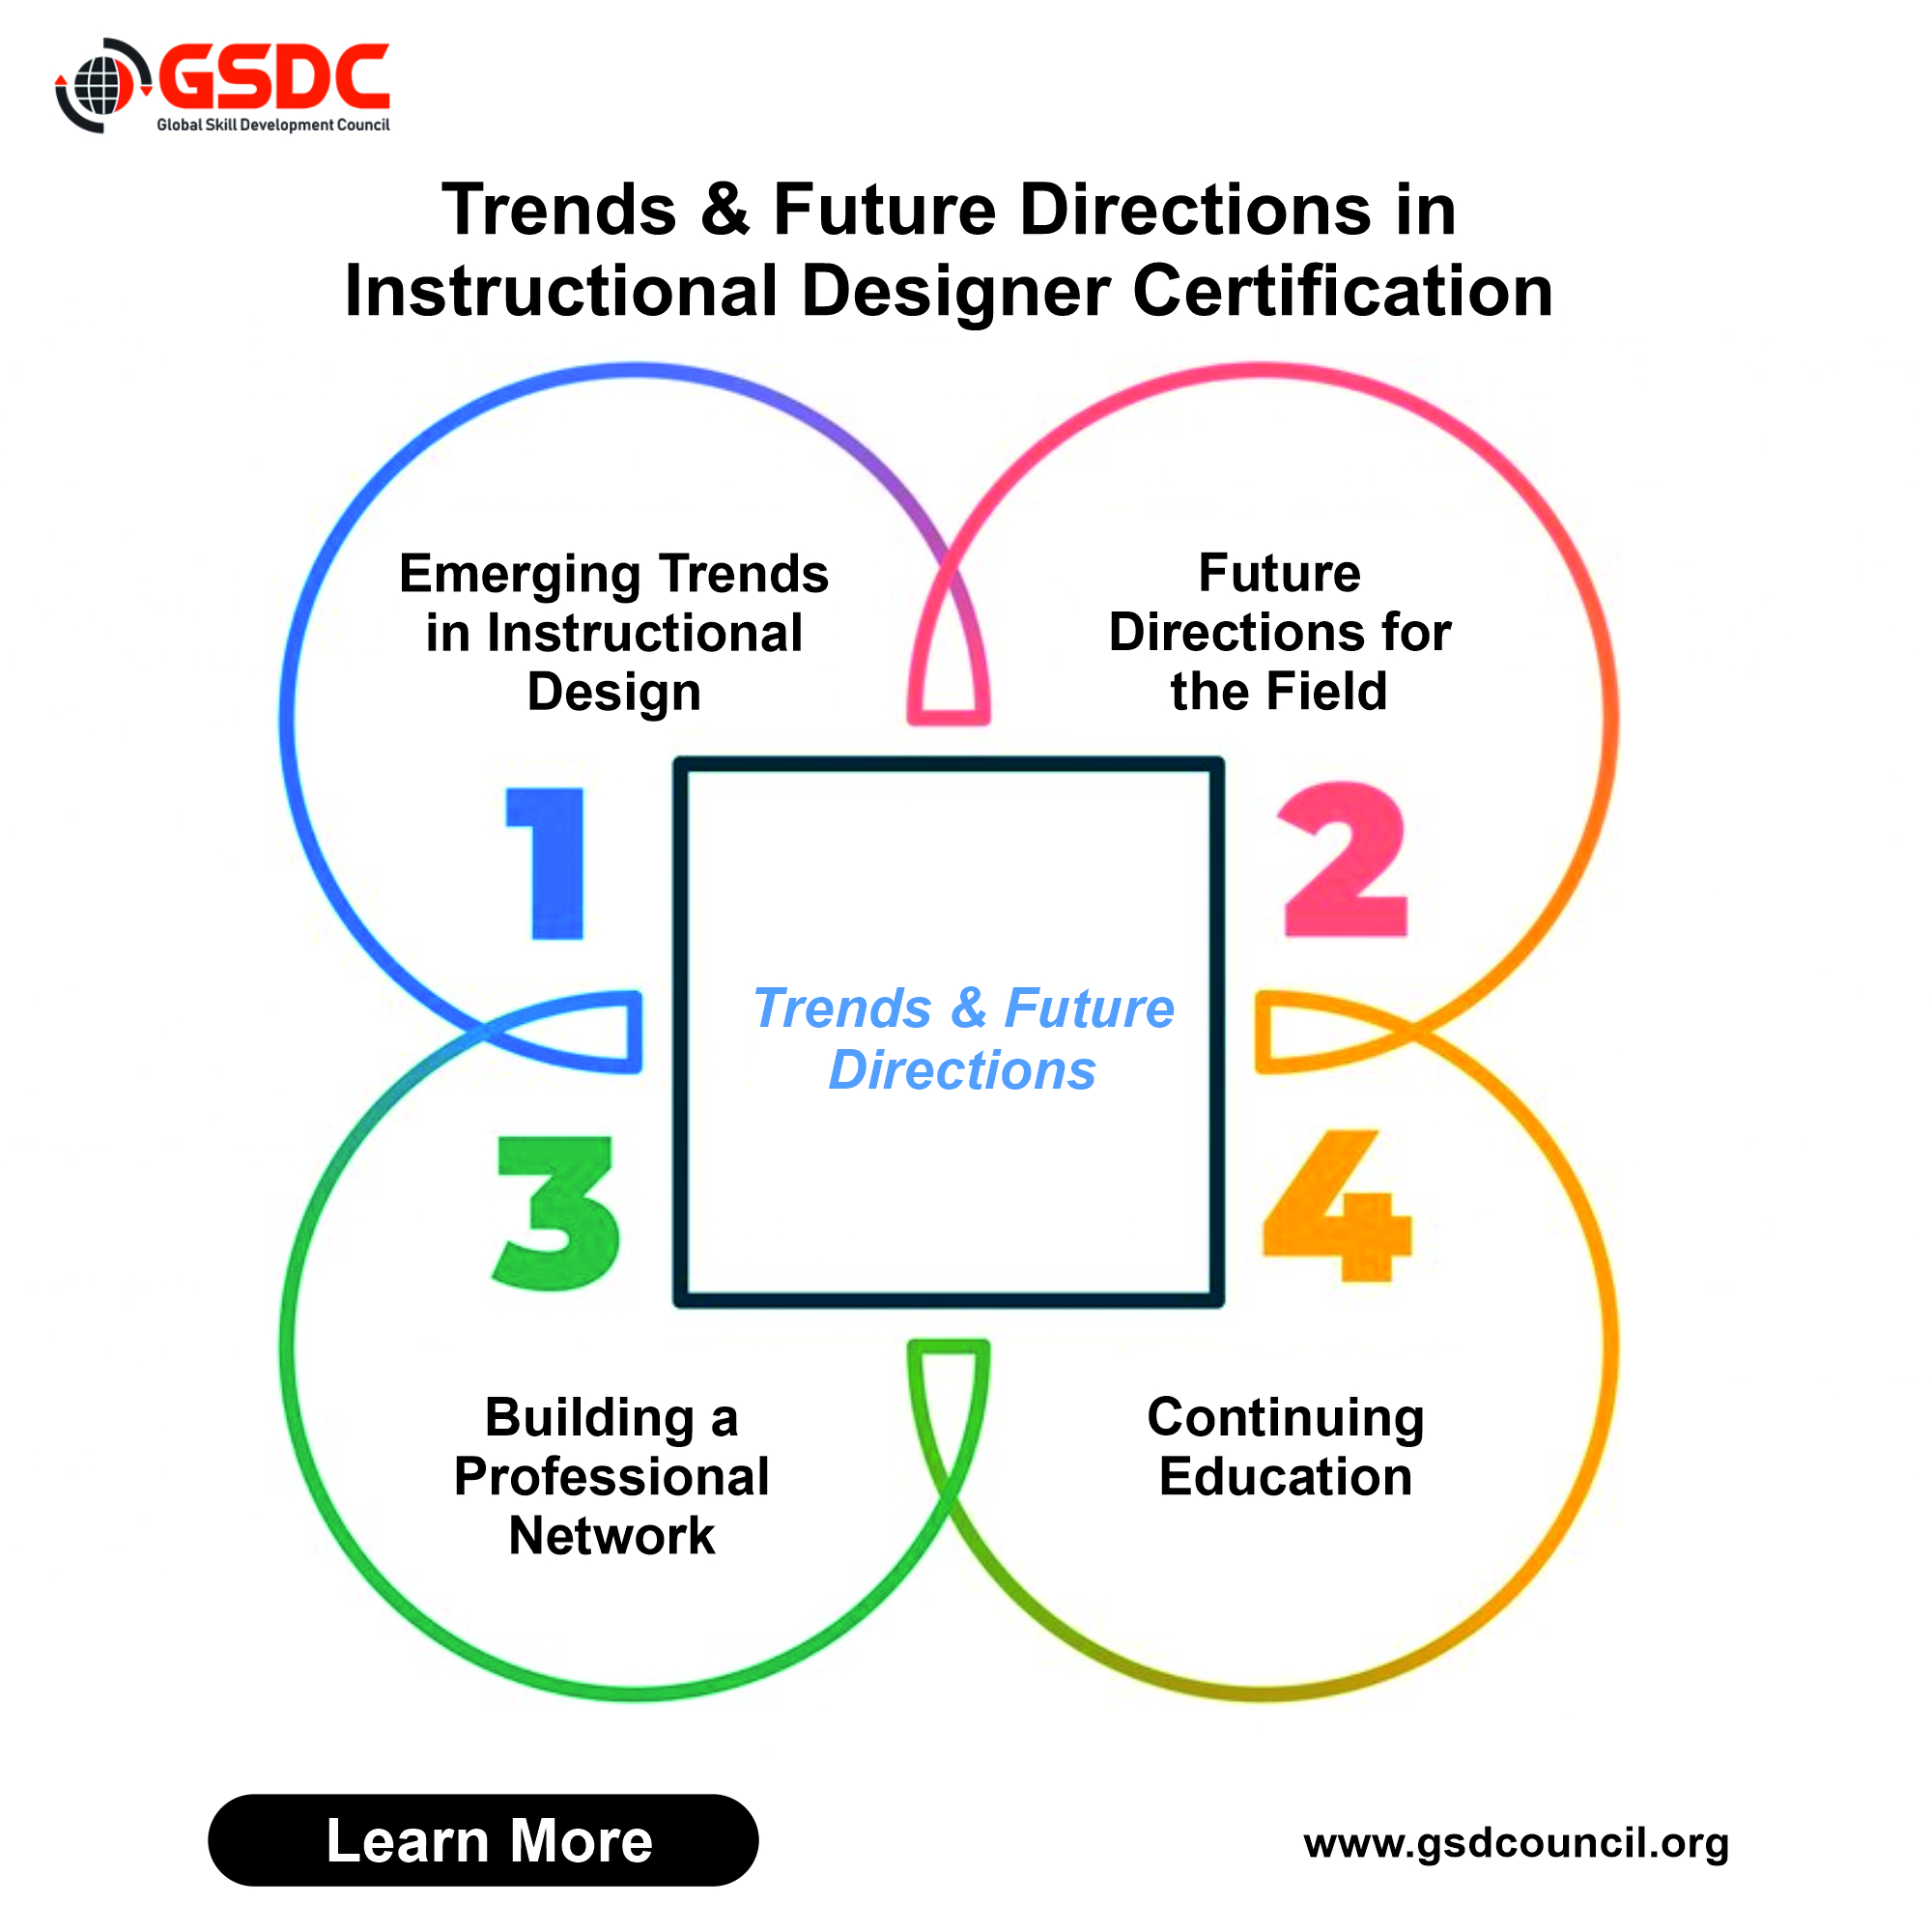 Trends and Future Directions in Instructional Designer Certification